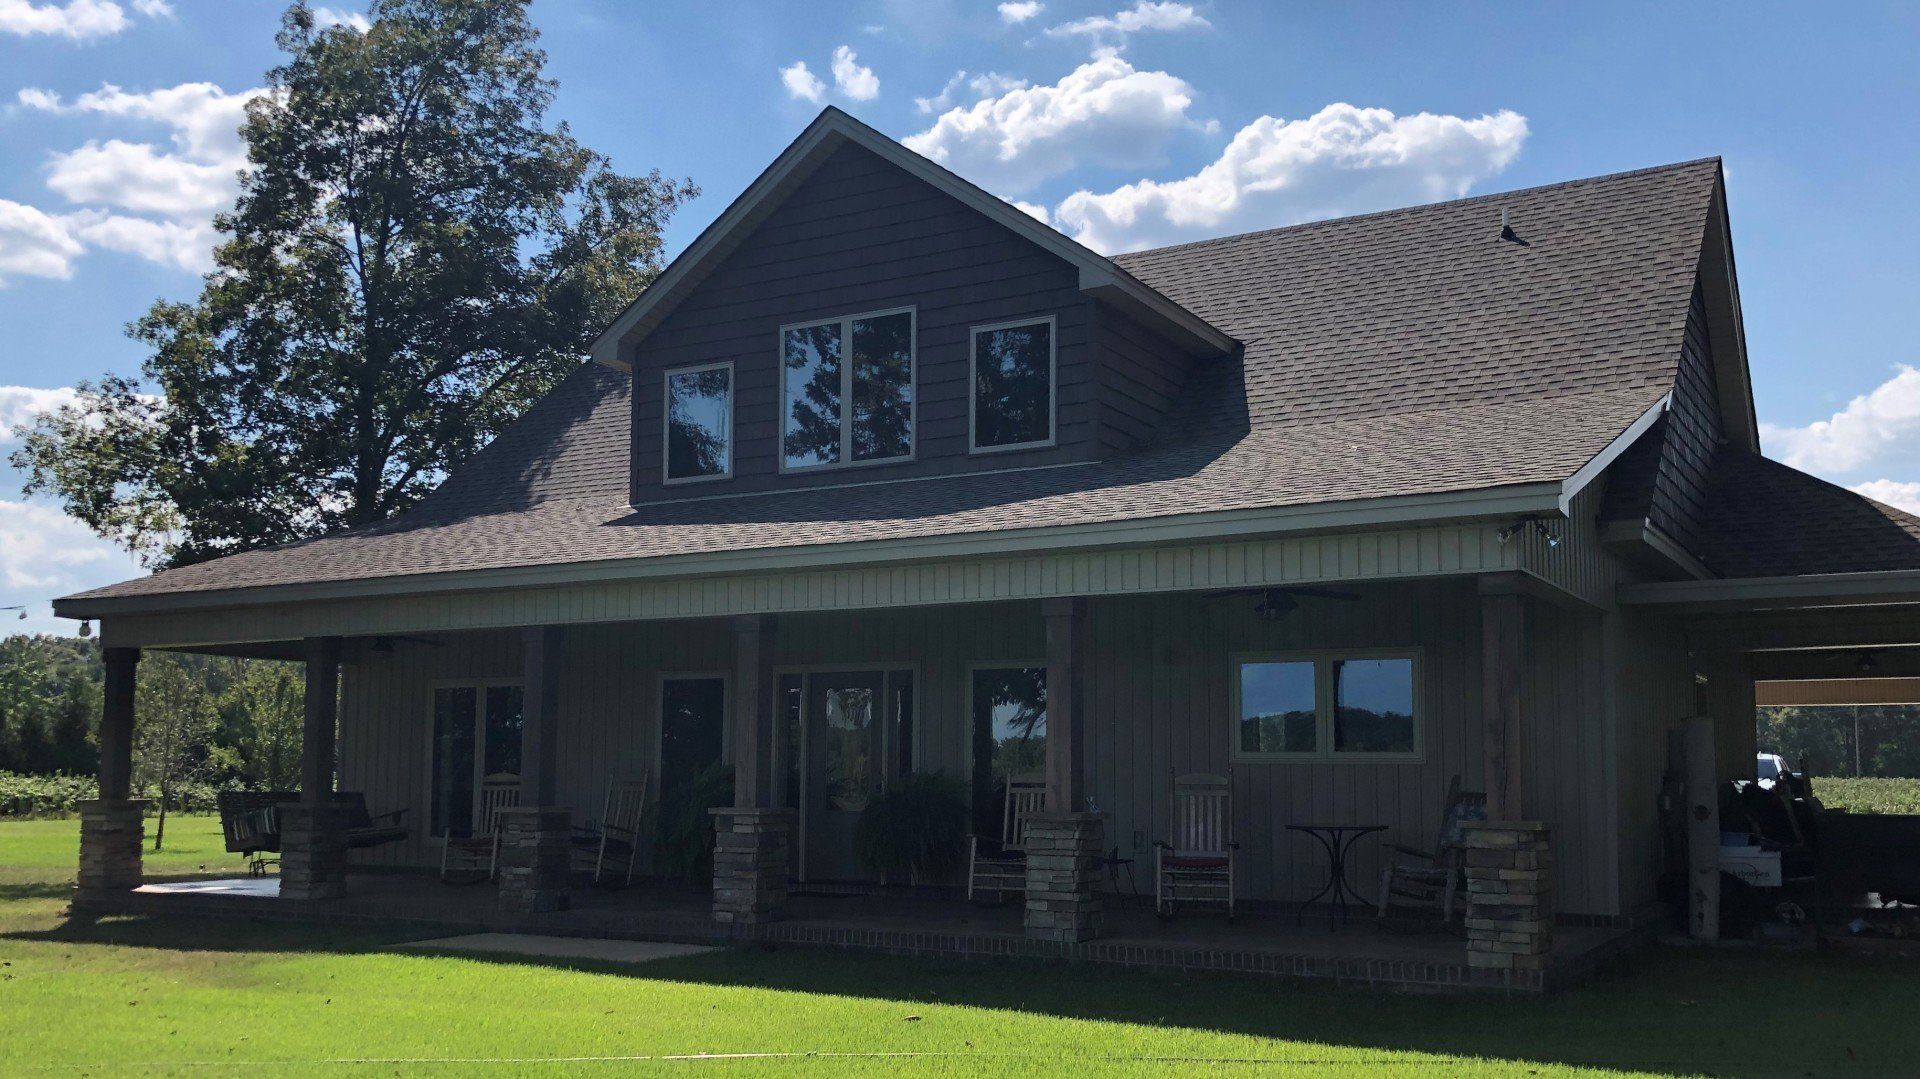 pro tint for home or business in lower central AL - The difference made in heat reduction was  loved immediately.  Bright Sun was also reduced to the desired level after SPF Residential Tint.